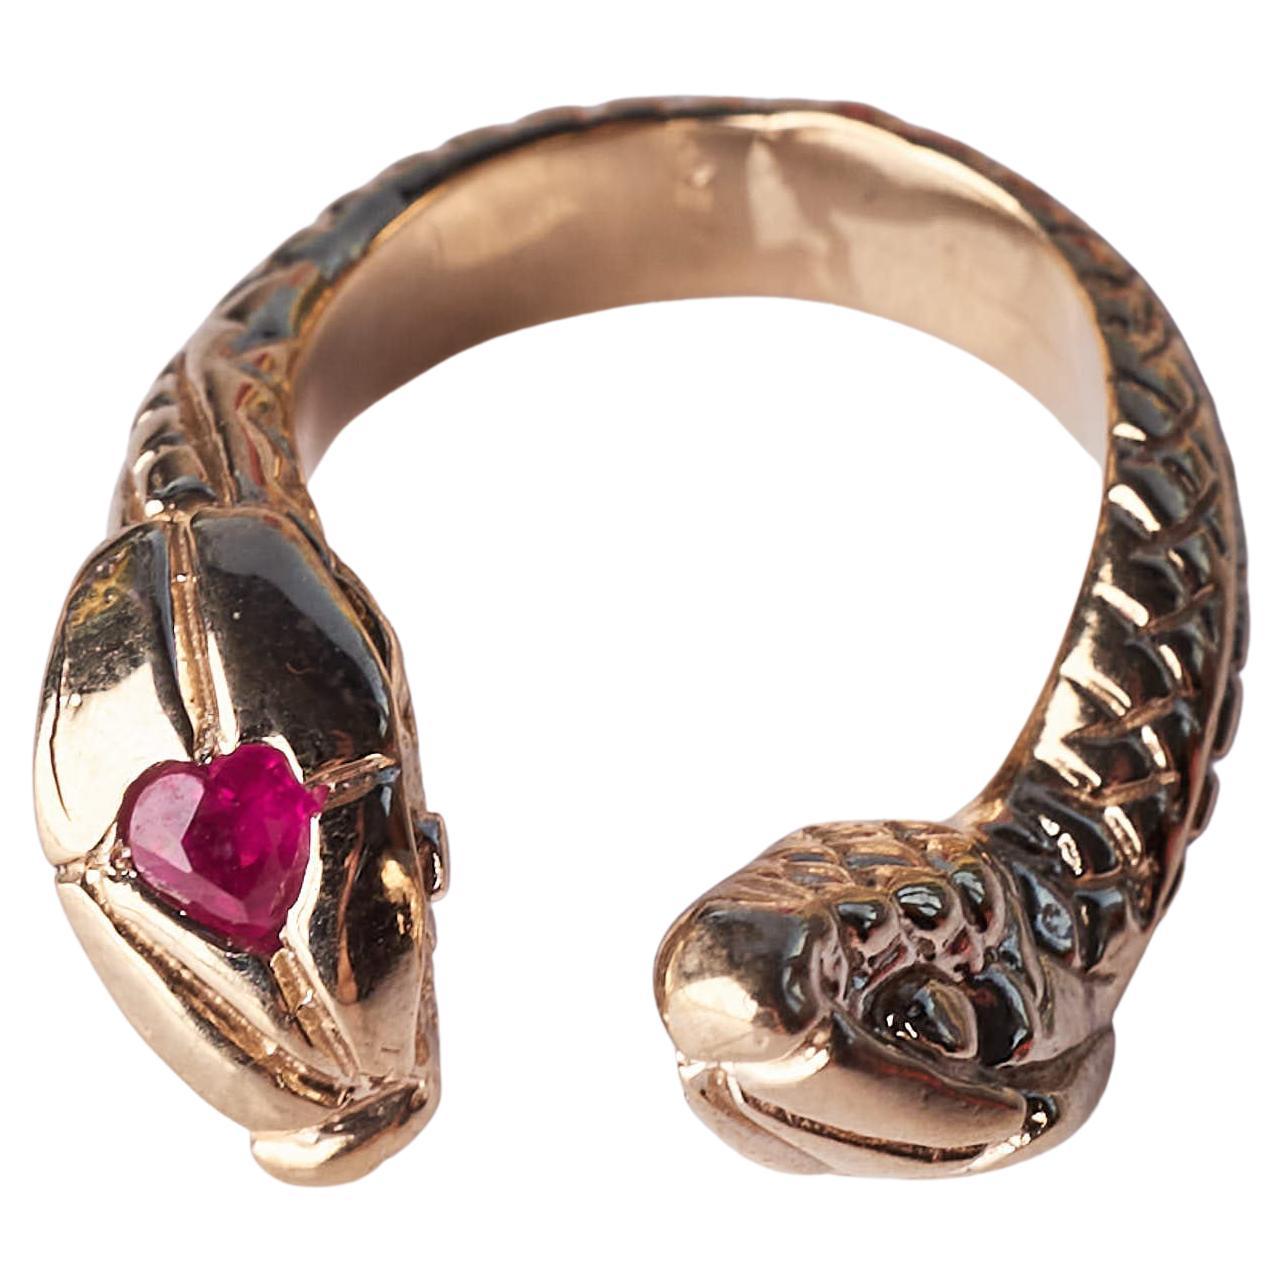 Heart Ruby Snake Ring Cocktail Ring Bronze J Dauphin
Perfect for Valentine Jewelry

This ring has one large  Heart Ruby on the head of one snake. Its a great gift as it is adjustable - and you can use on any finger and just squeeze it on your